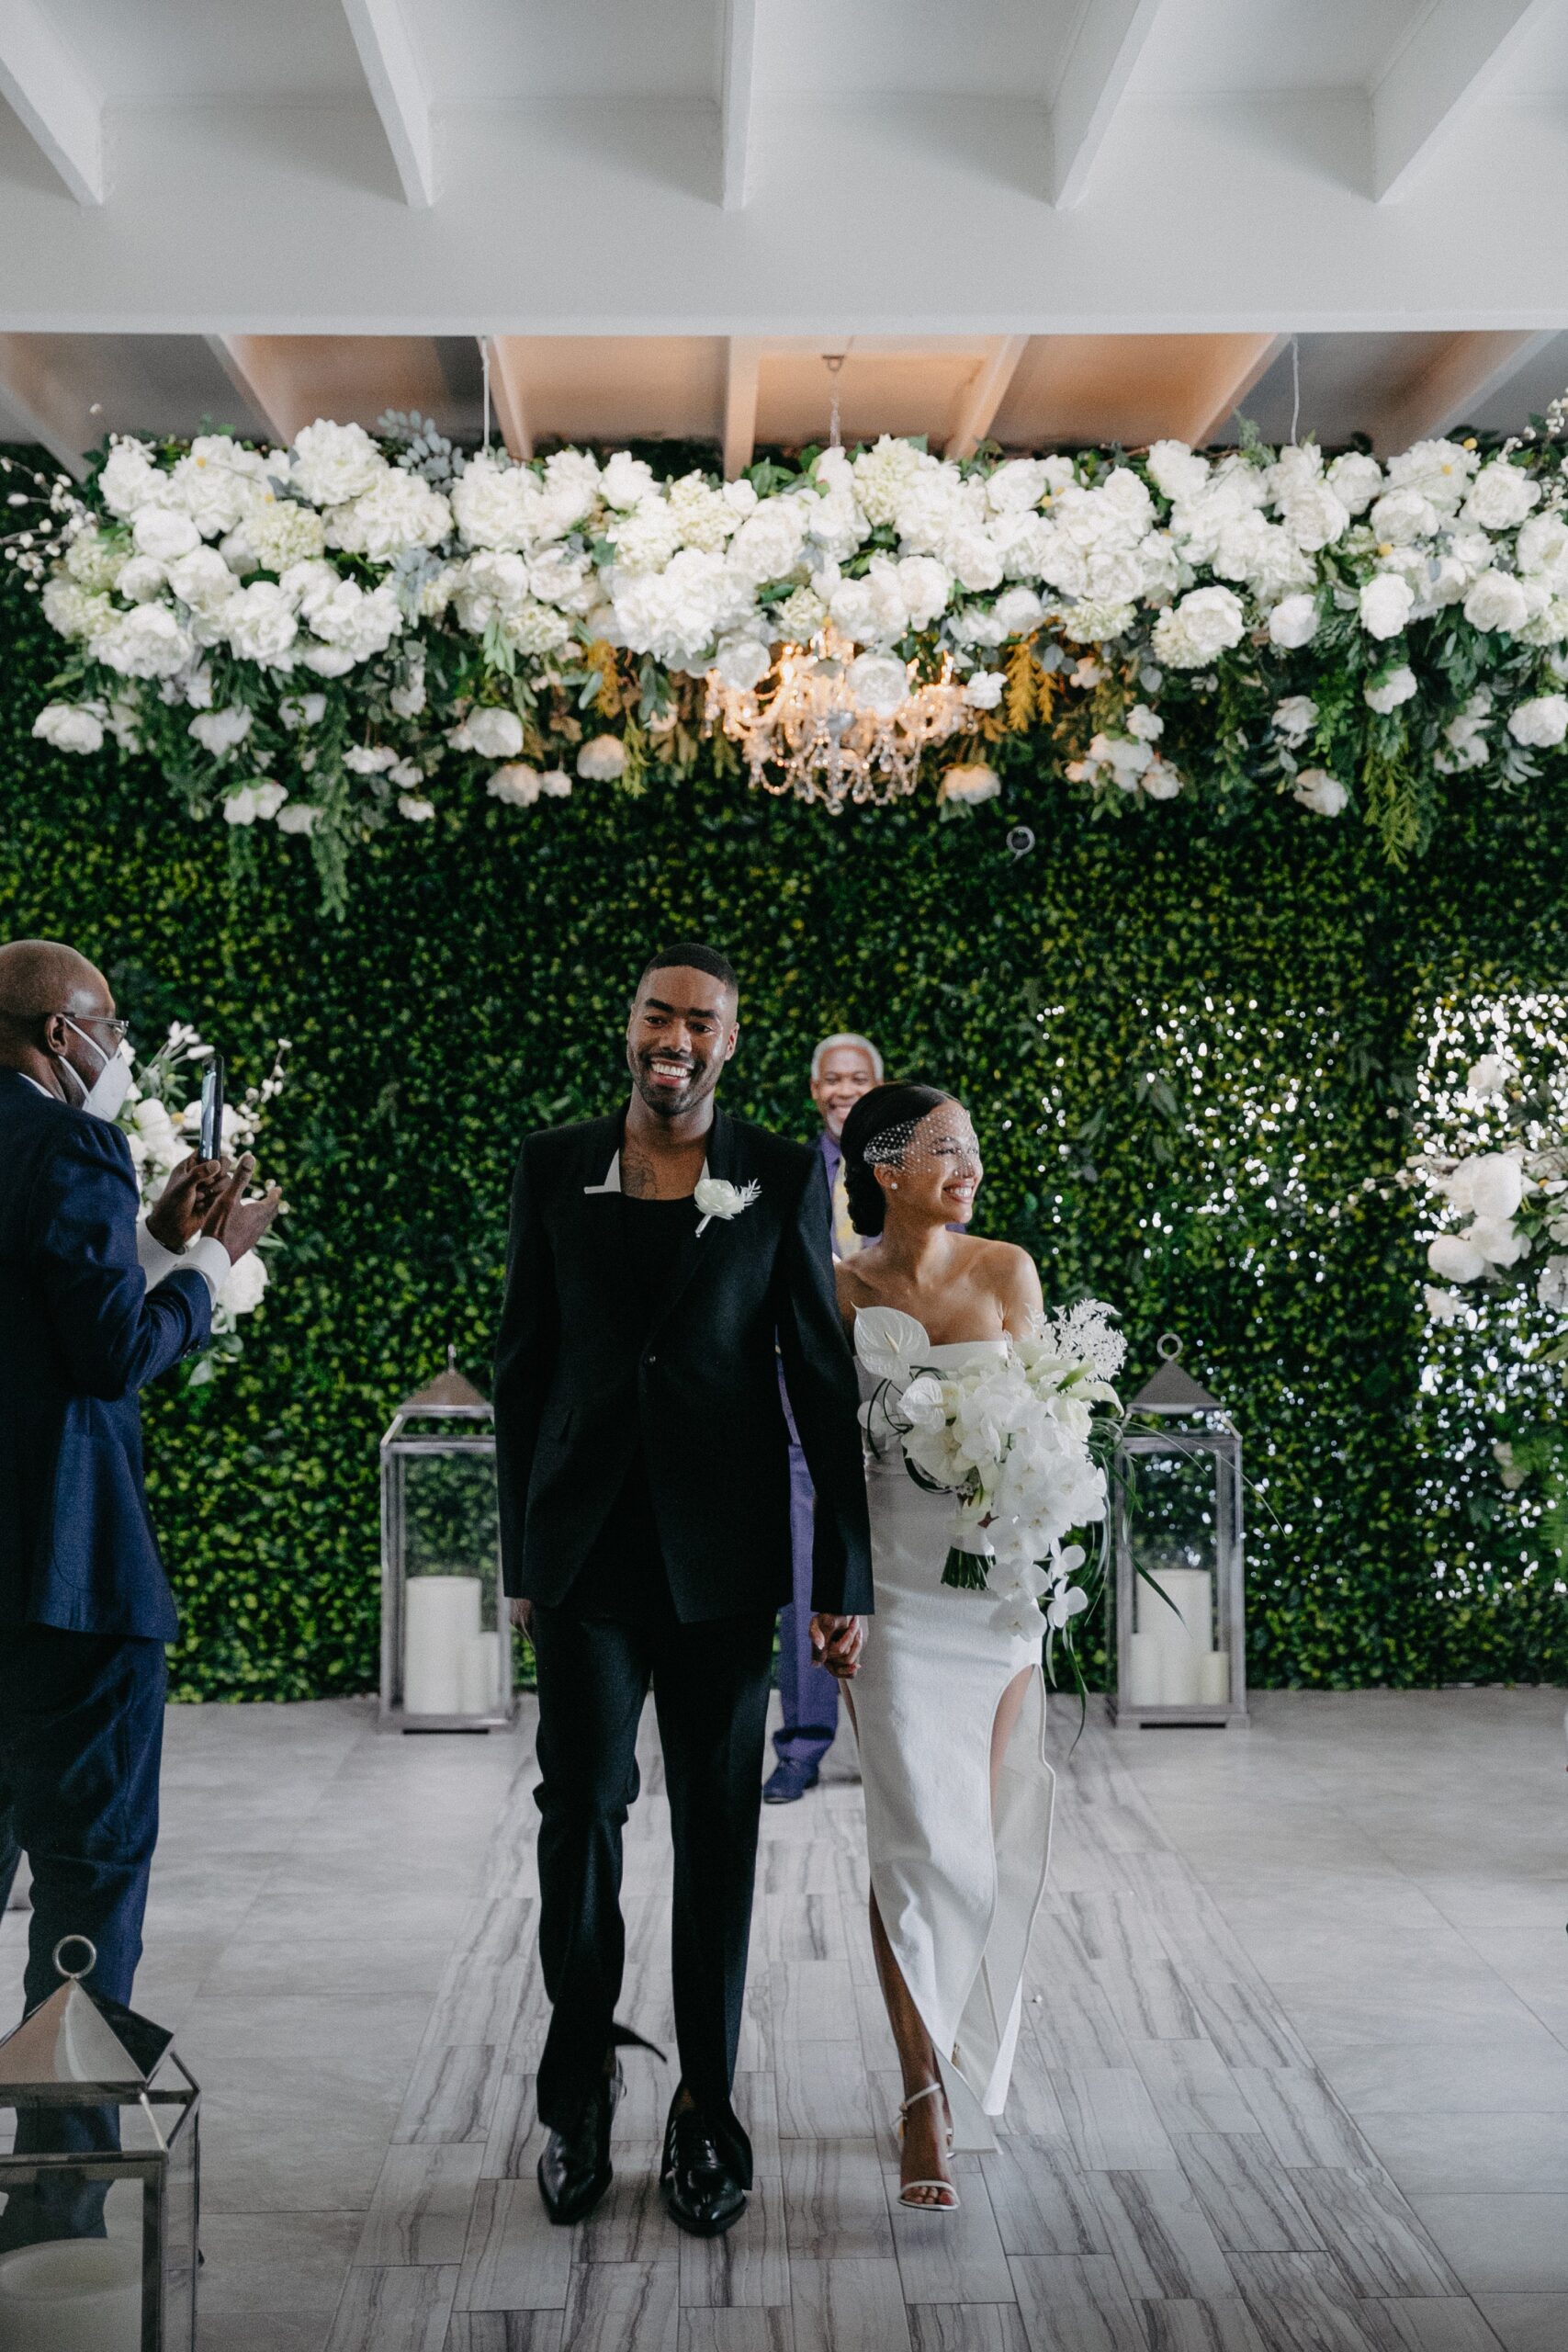 Class and Simplicity Reigned Supreme at This Los Angeles Wedding